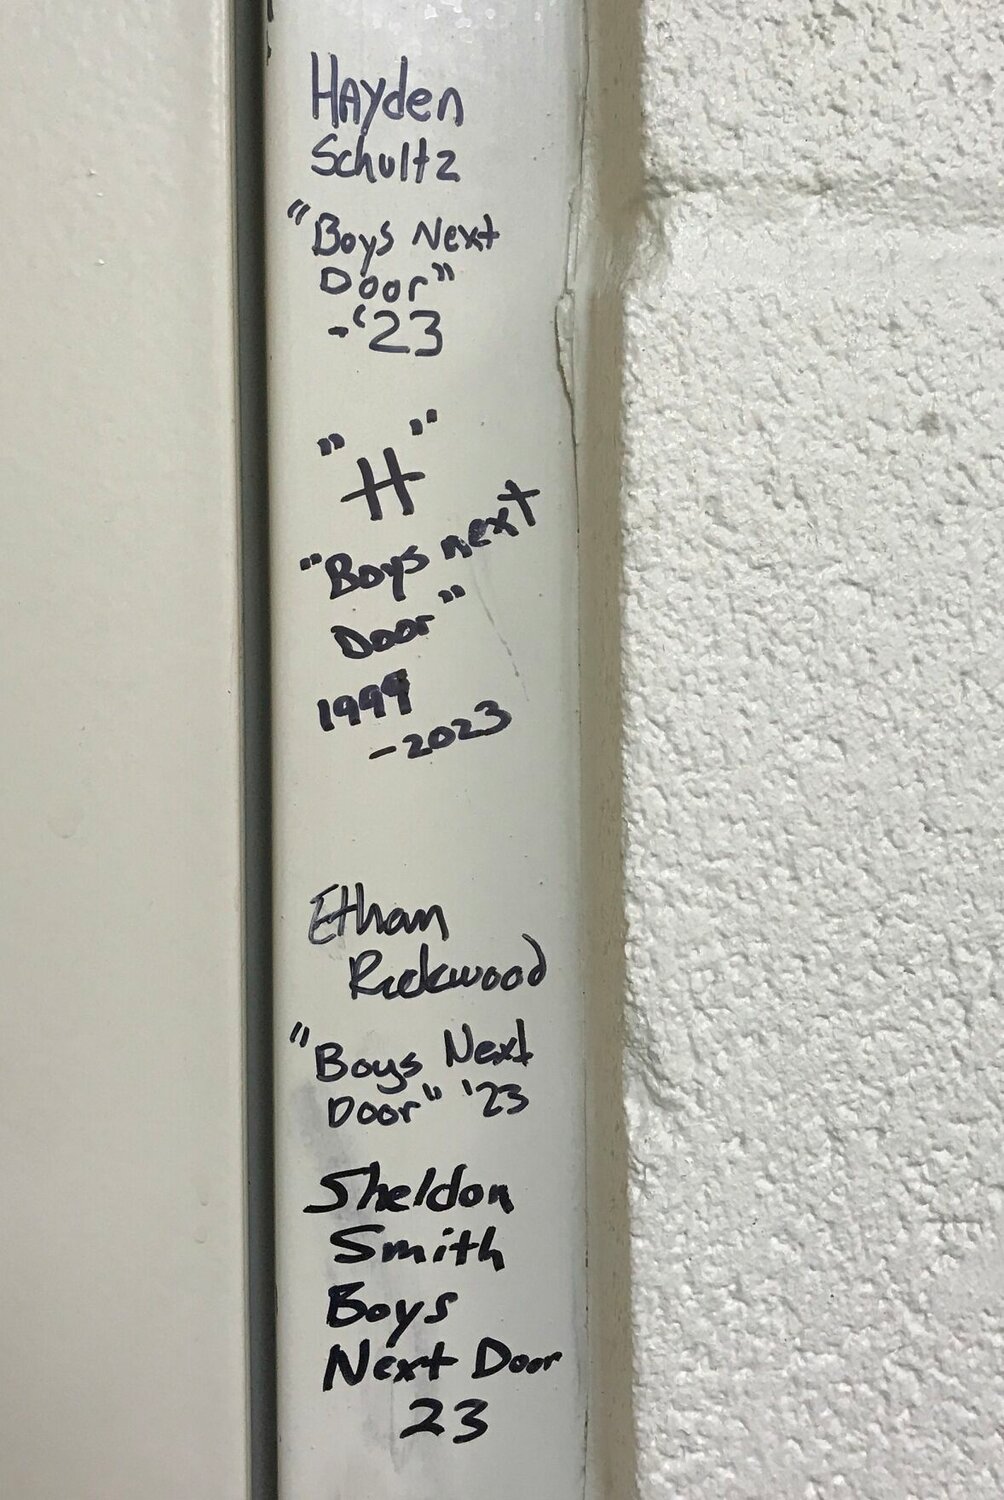 During H's time as the drama teacher, he has directed 41 plays and musicals. One tradition that started in 2014 was the performing students started signing the door jam during their senior year. So after the production of 'The Boys Next Door,' another signature was added this year: "The students told me that since it was my senior year I had better sign my name," recalled H.


Contributed Photo by Greg Holtschneider